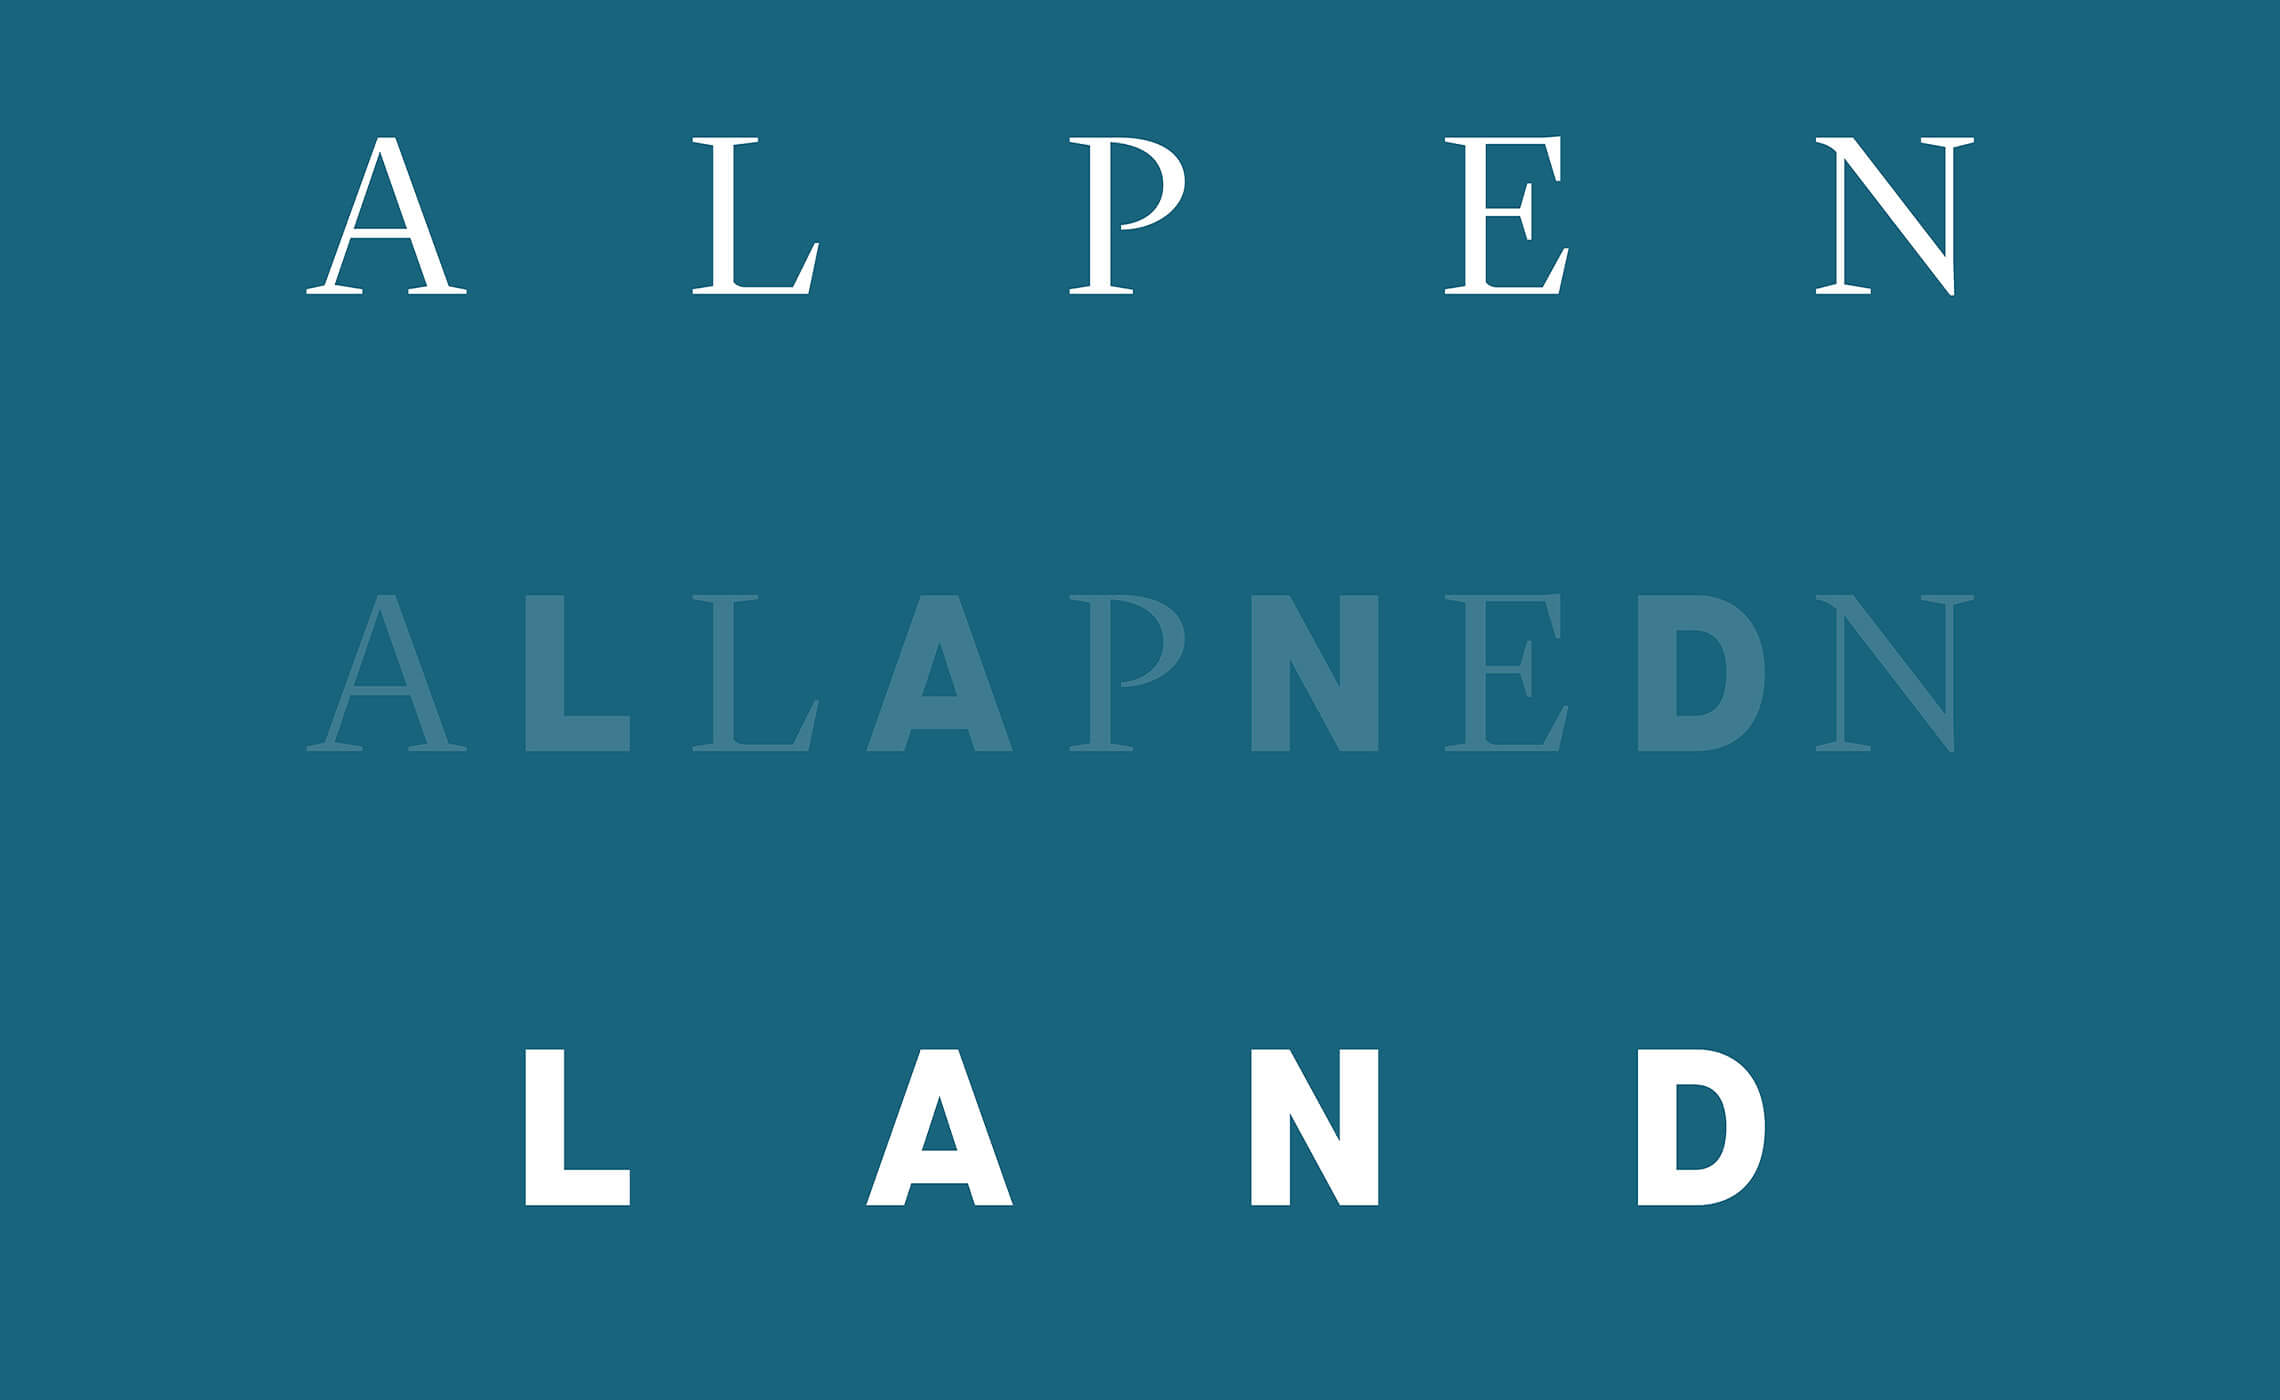 On this picture you can see the solution of the little riddle about the name Alpenland.